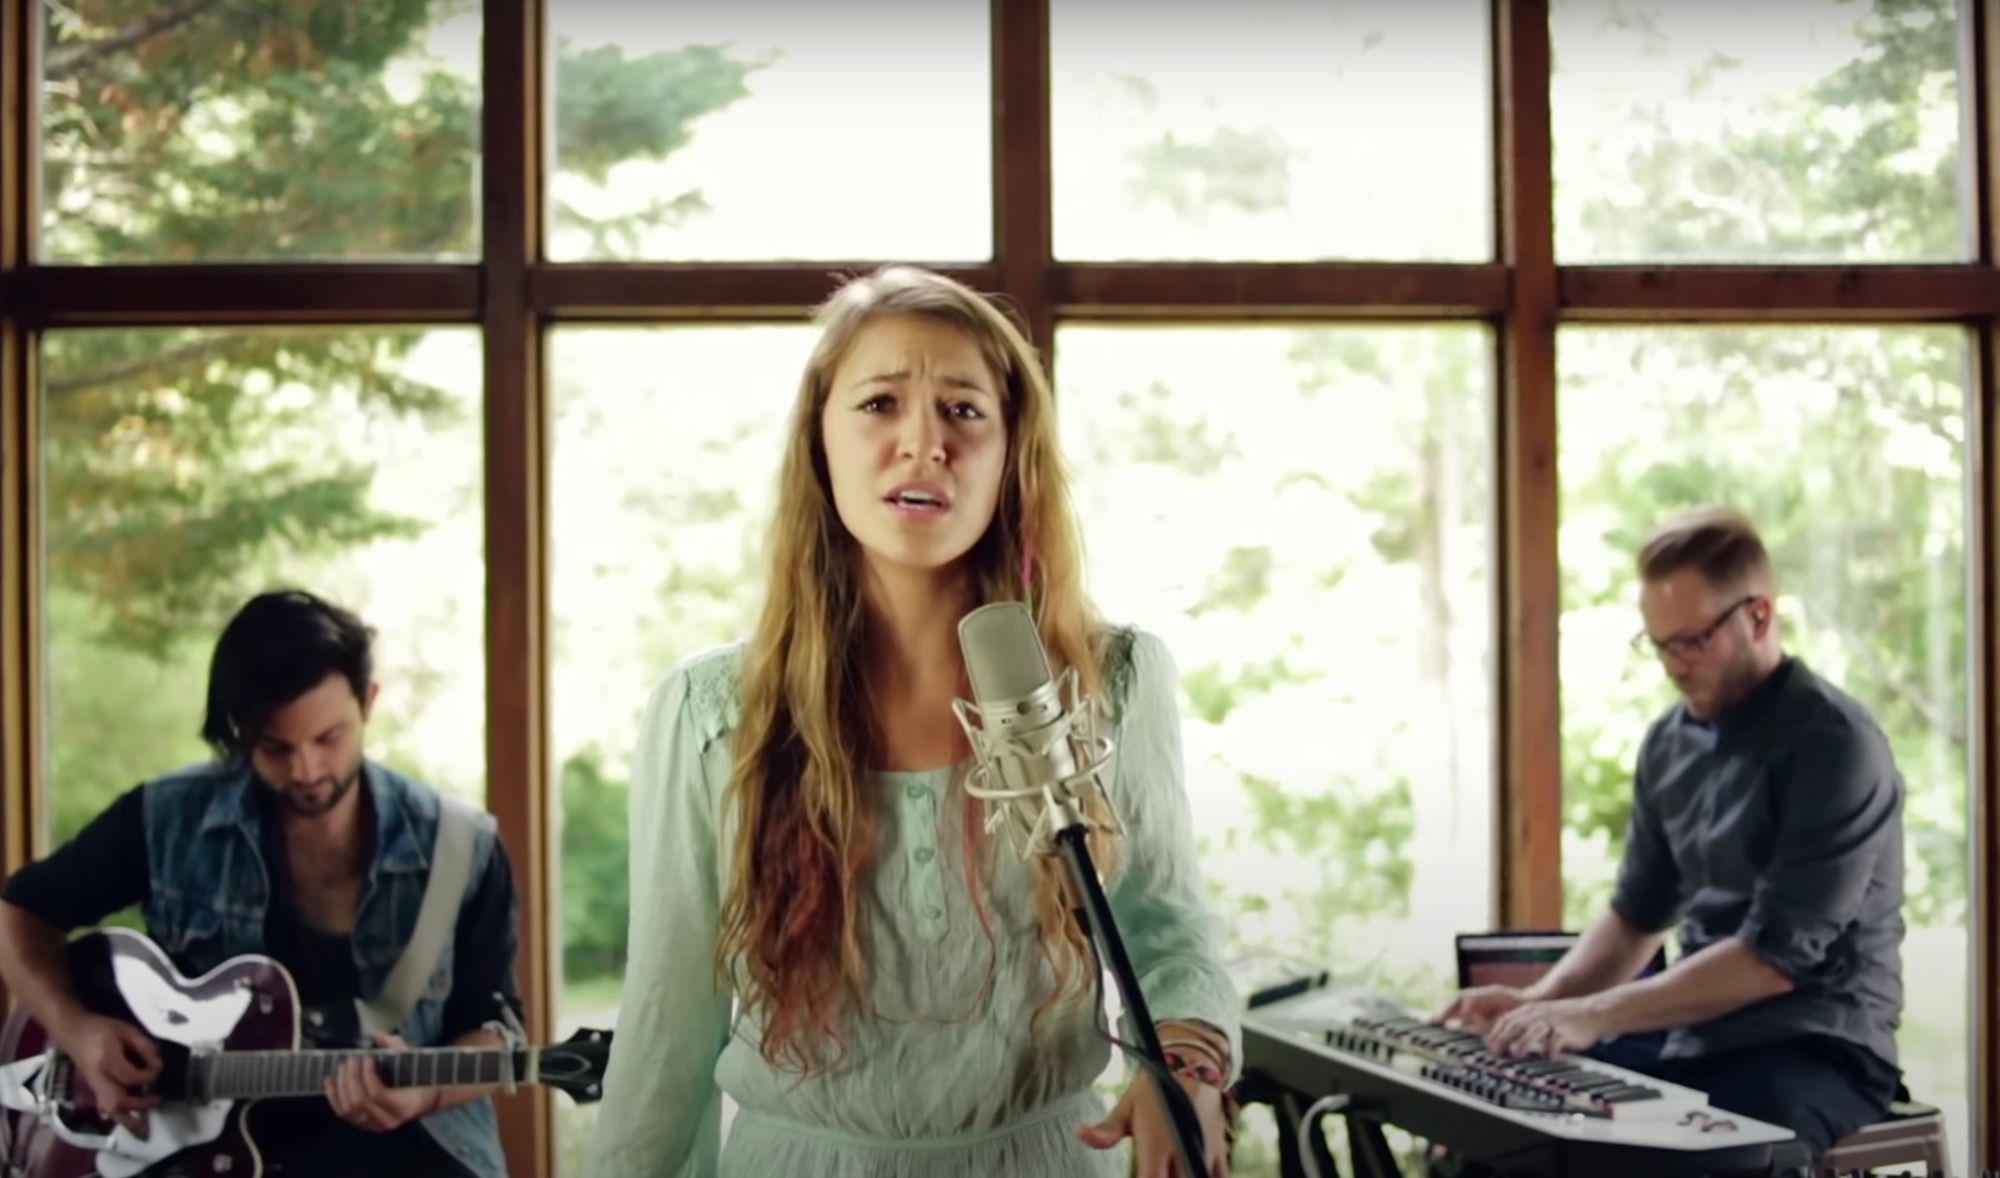 Behold! The Holidays Hath Arrived, says this Lauren Daigle Christmas album